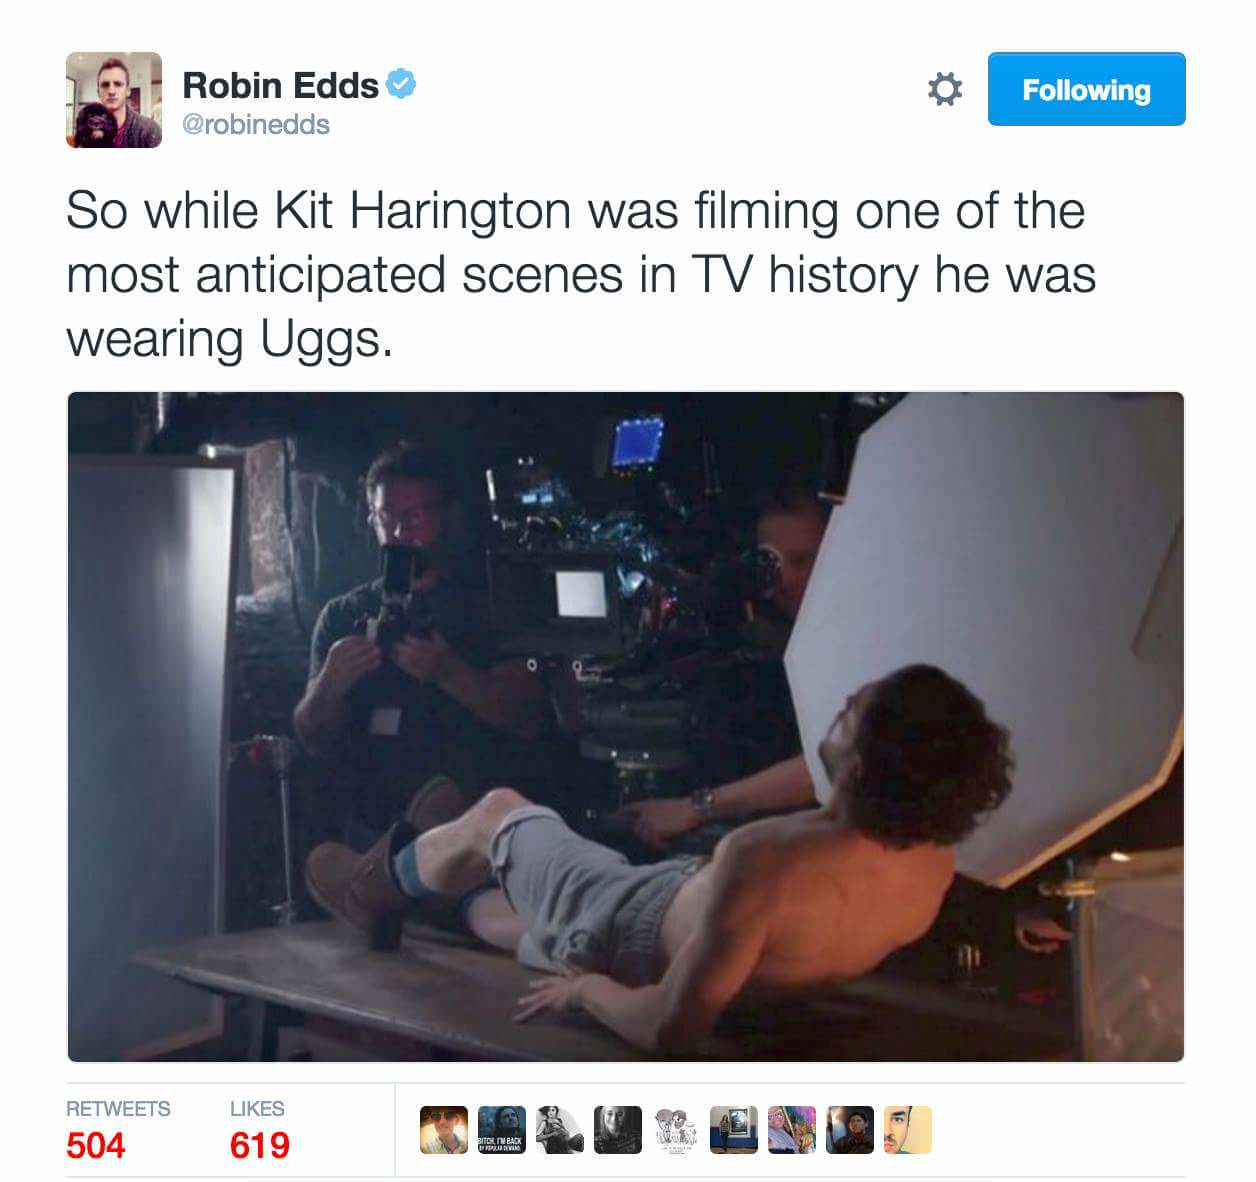 jon snow uggs - Robin Edds ing So while Kit Harington was filming one of the most anticipated scenes in Tv history he was wearing Uggs. 504 Ve Bitolivat 619